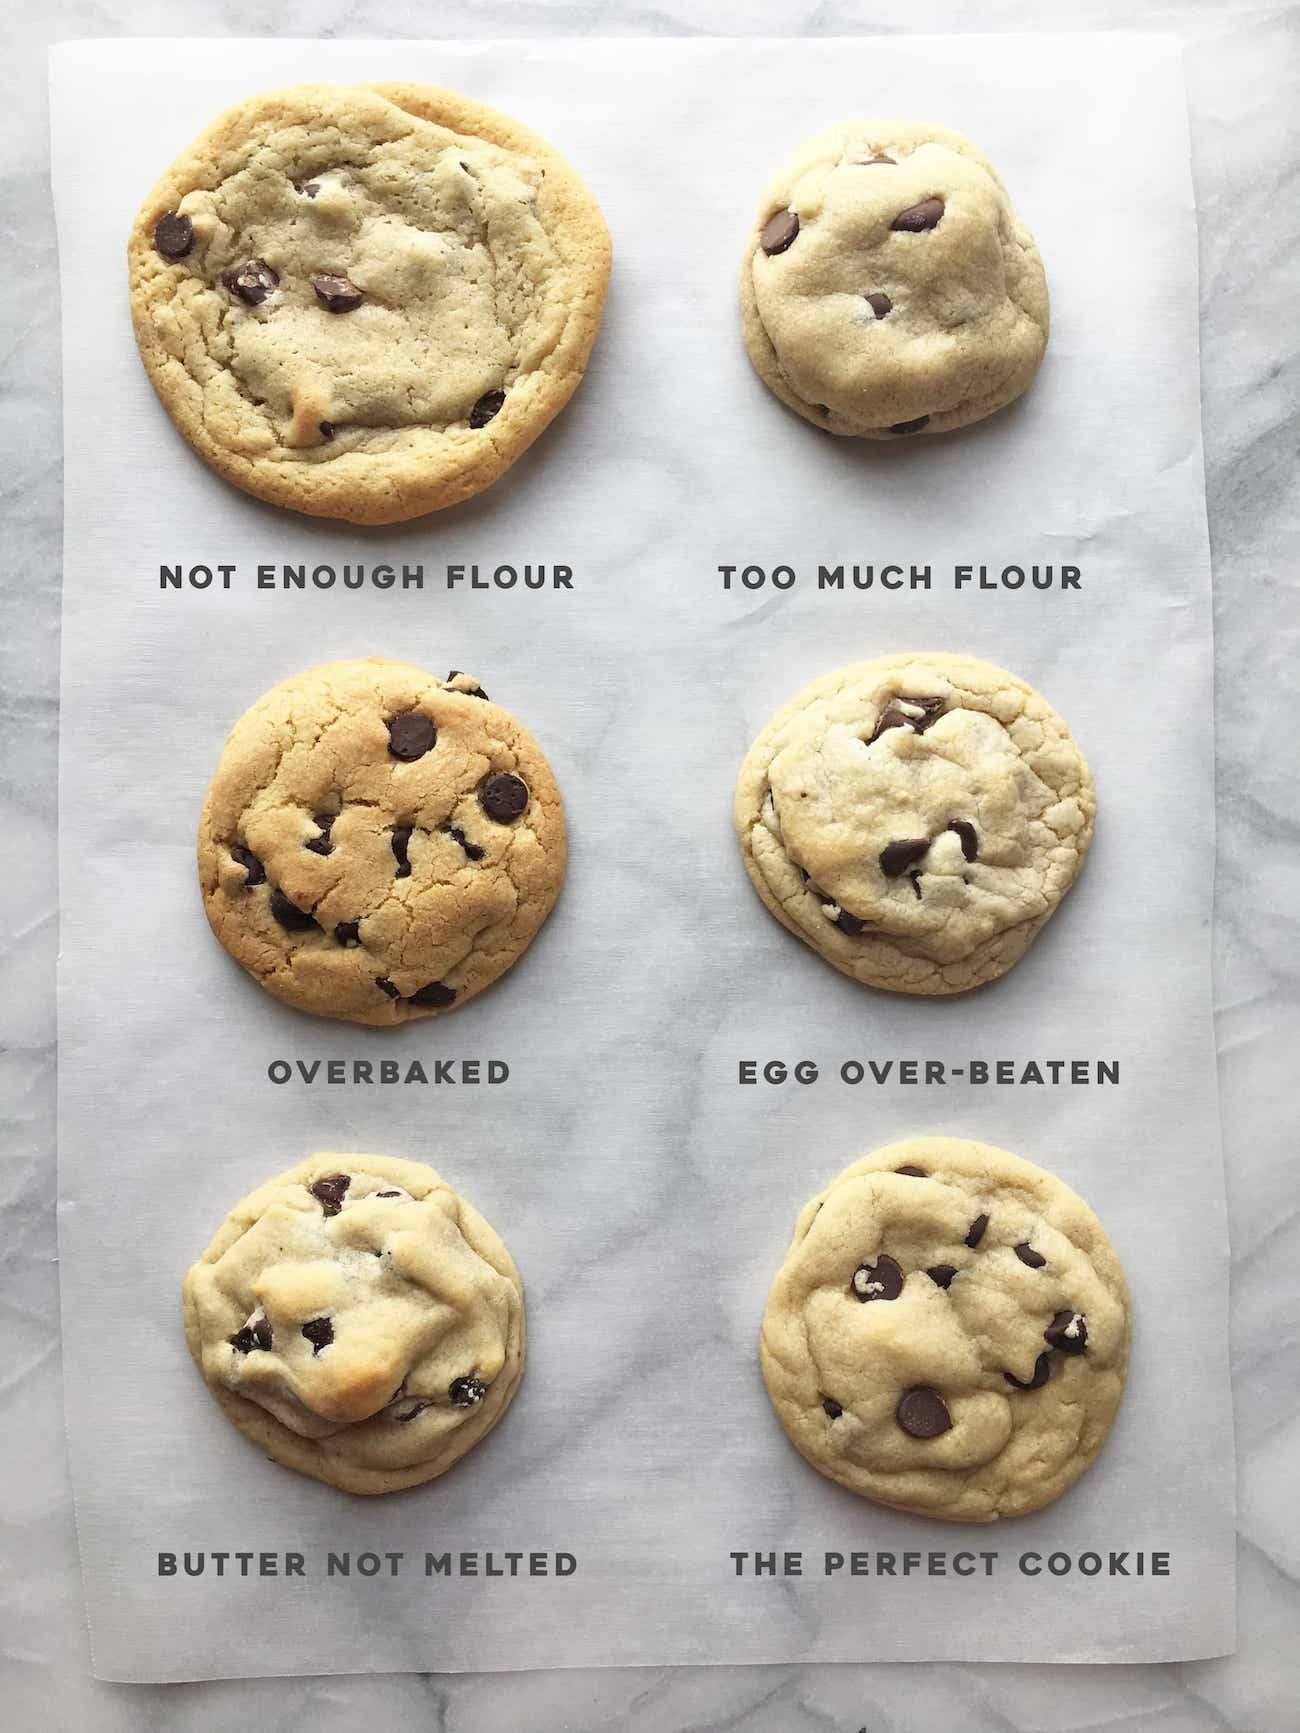 Six different chocolate chip cookies arranged on parchment paper.